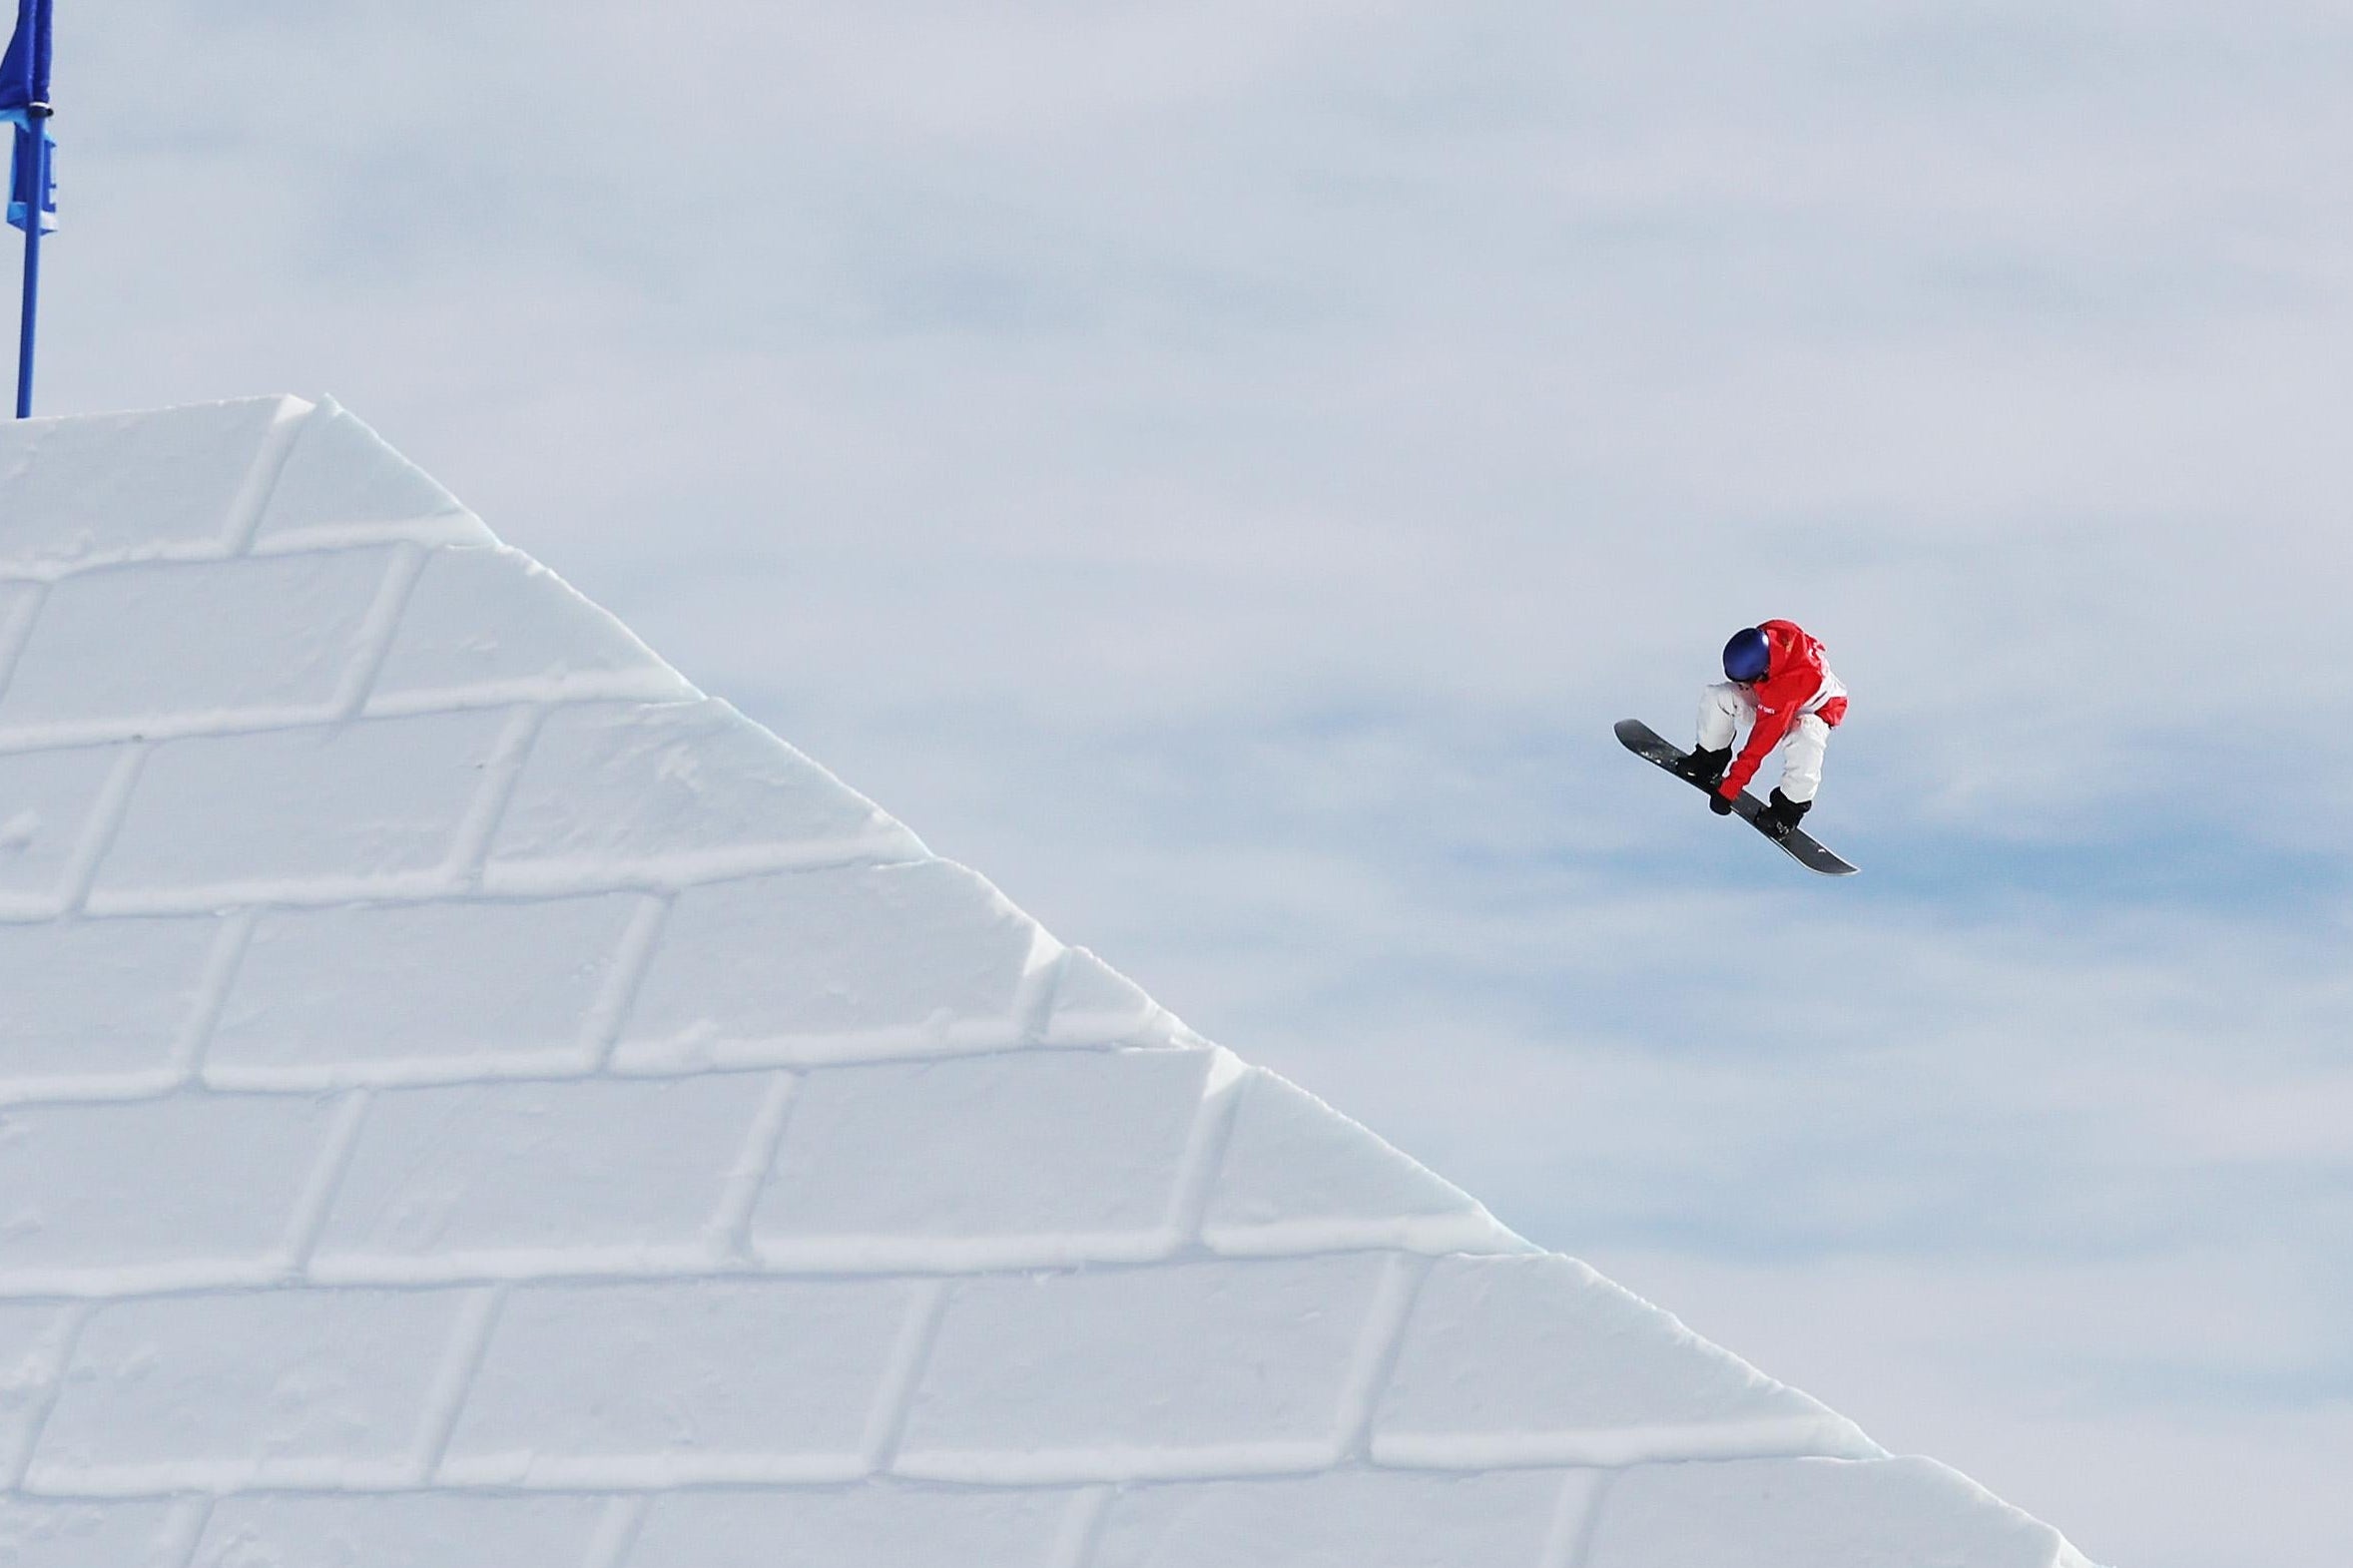 The snowboarder flies and tucks through the air over a white brick sloping wall